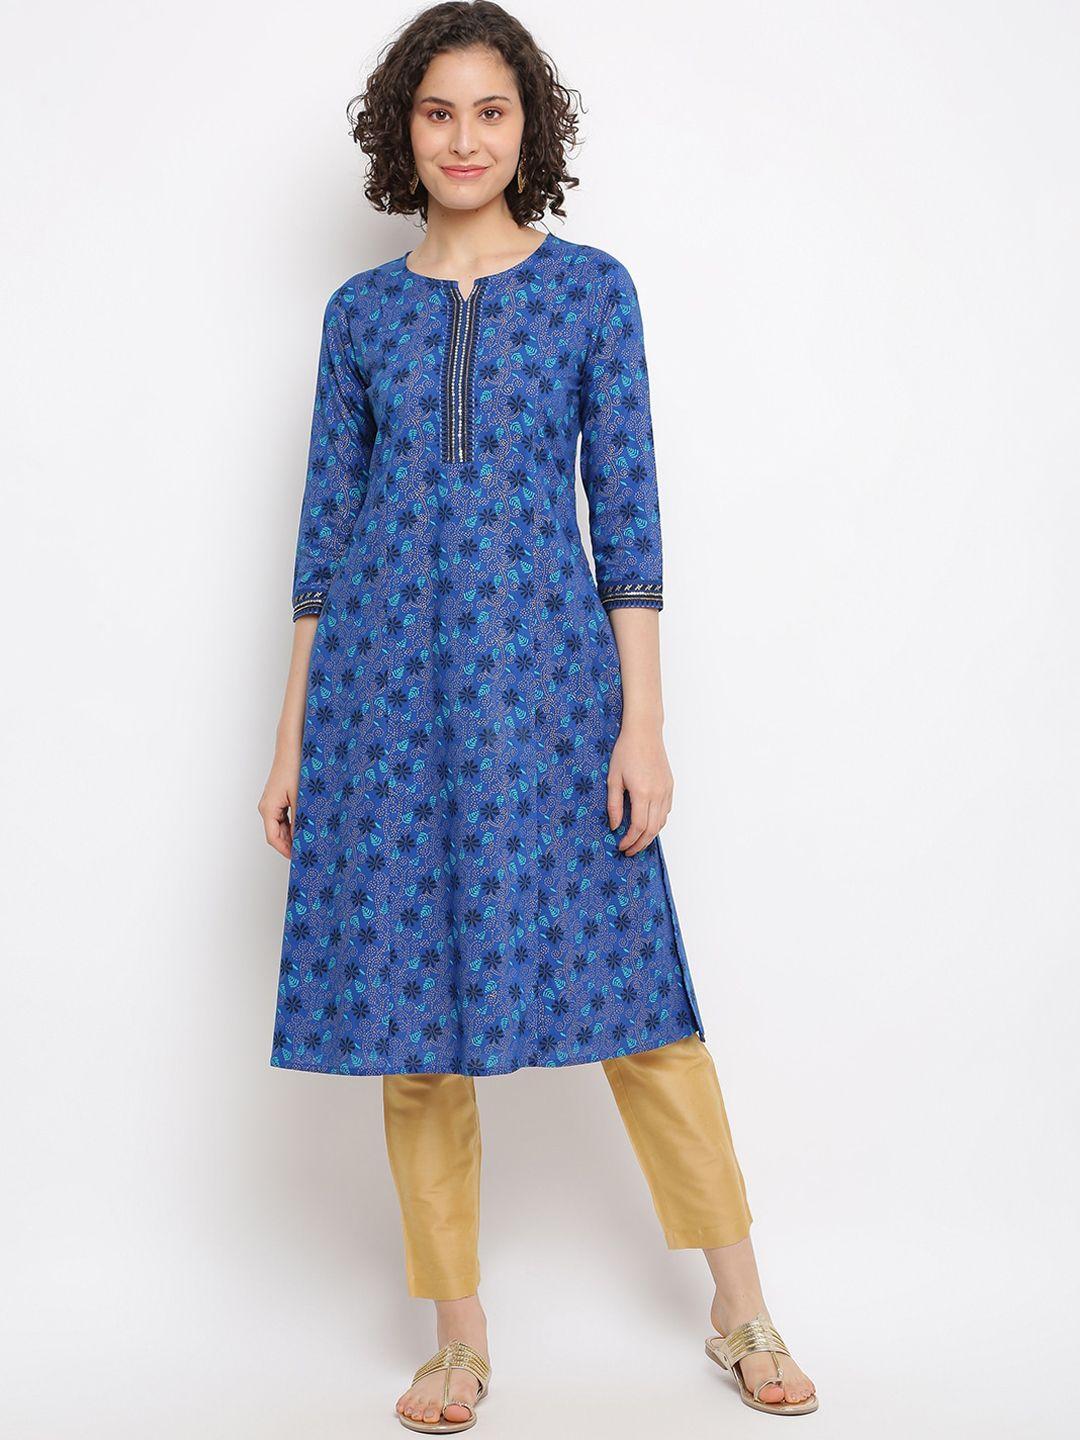 imara floral printed notched neck sequinned pure cotton a-line kurta